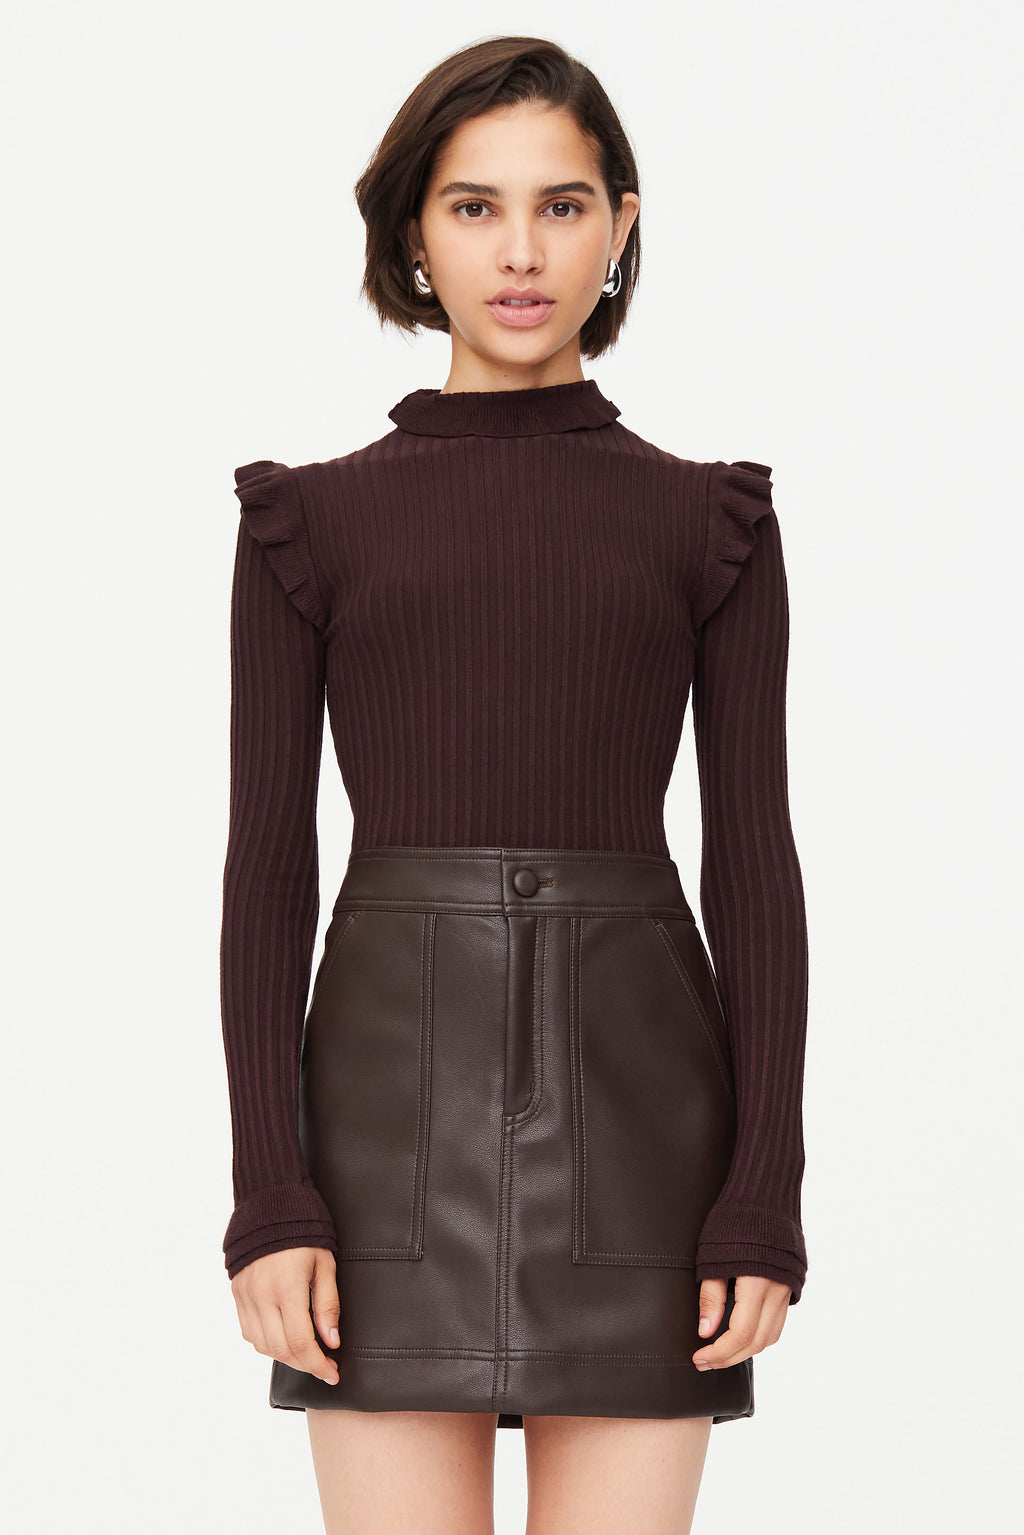 Brown turtleneck with ruffle details on shoulders and neck